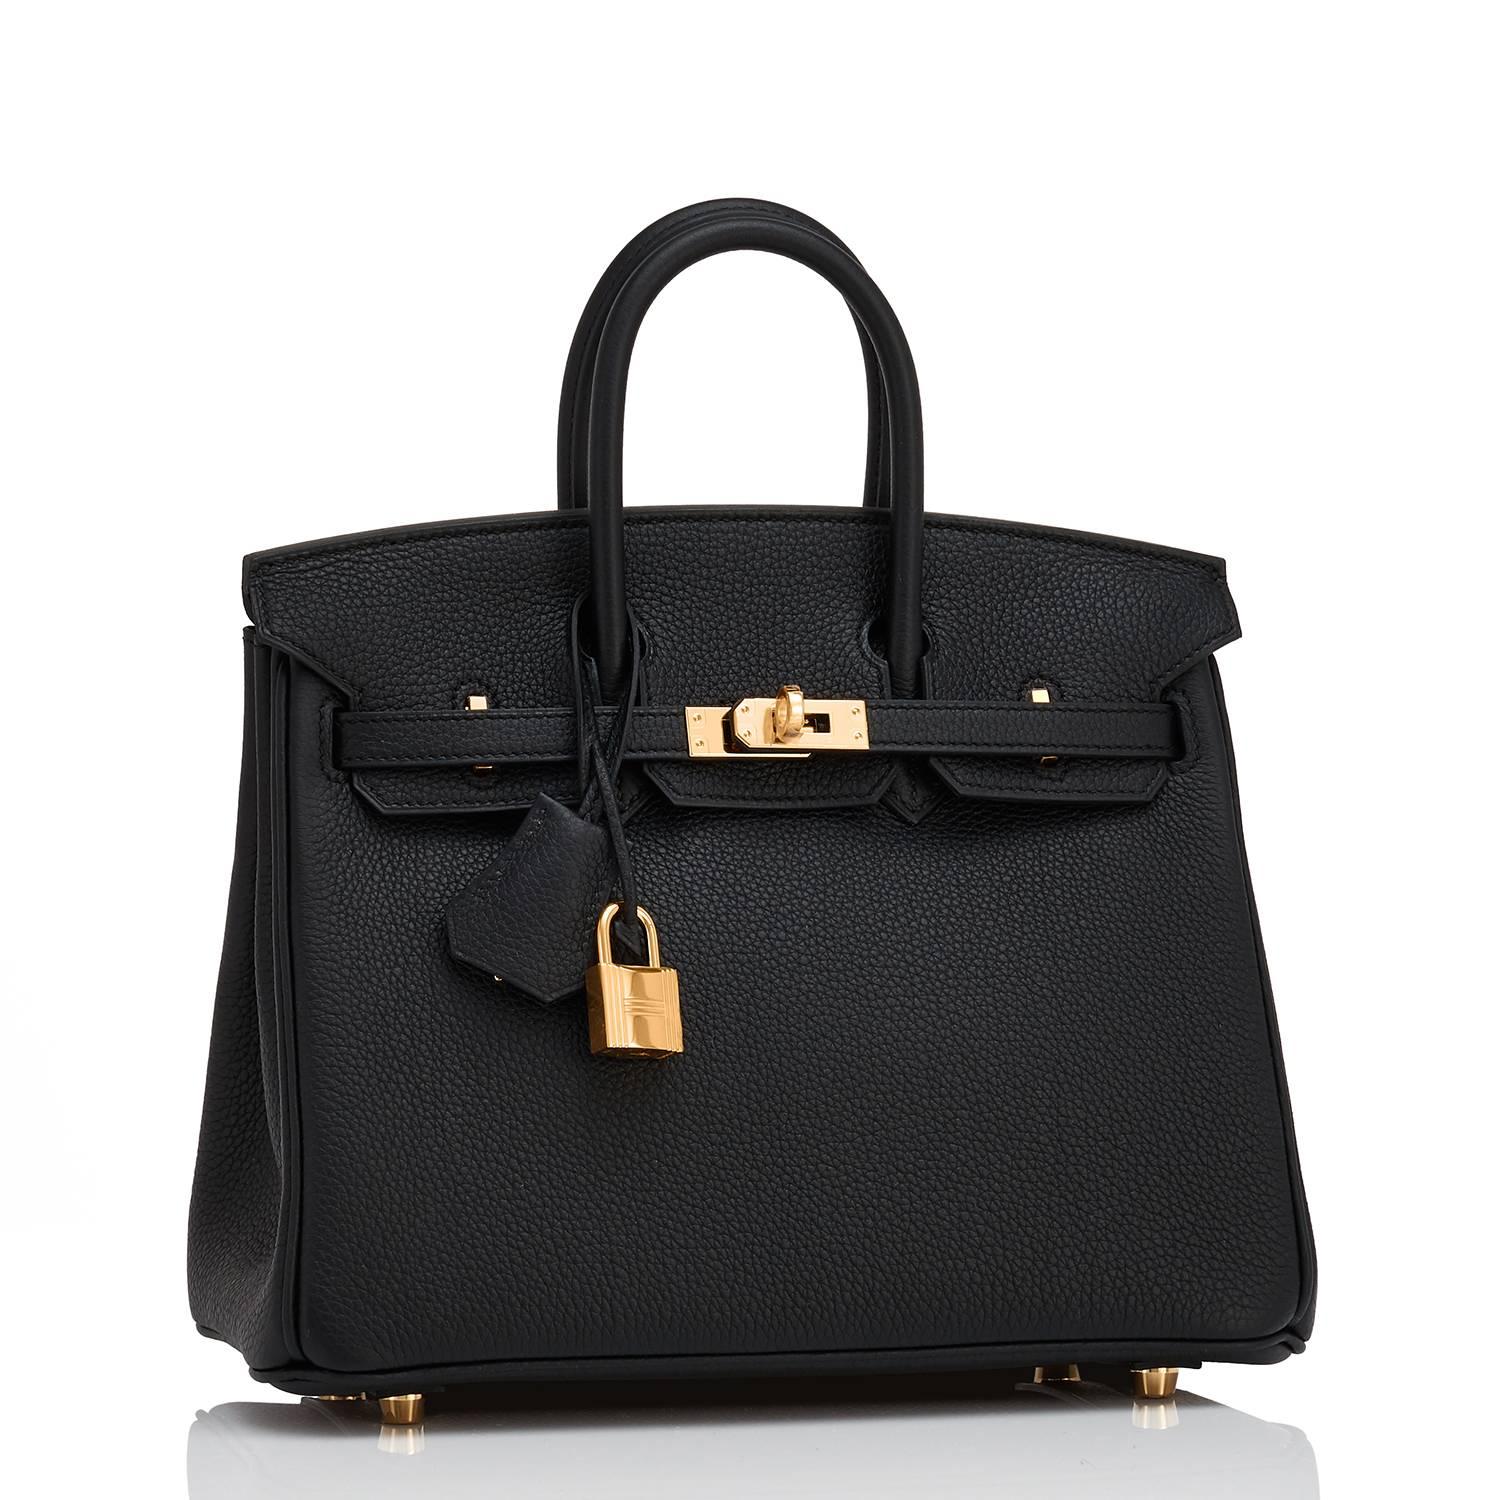 Hermes Black Baby Birkin 25cm Togo Gold Hardware Jewel
Brand New in Box. Store Fresh. Pristine Condition (with plastic on hardware) 
Perfect gift! Comes full set with keys, lock, clochette, a sleeper for the bag, rain protector, and Hermes box.
As